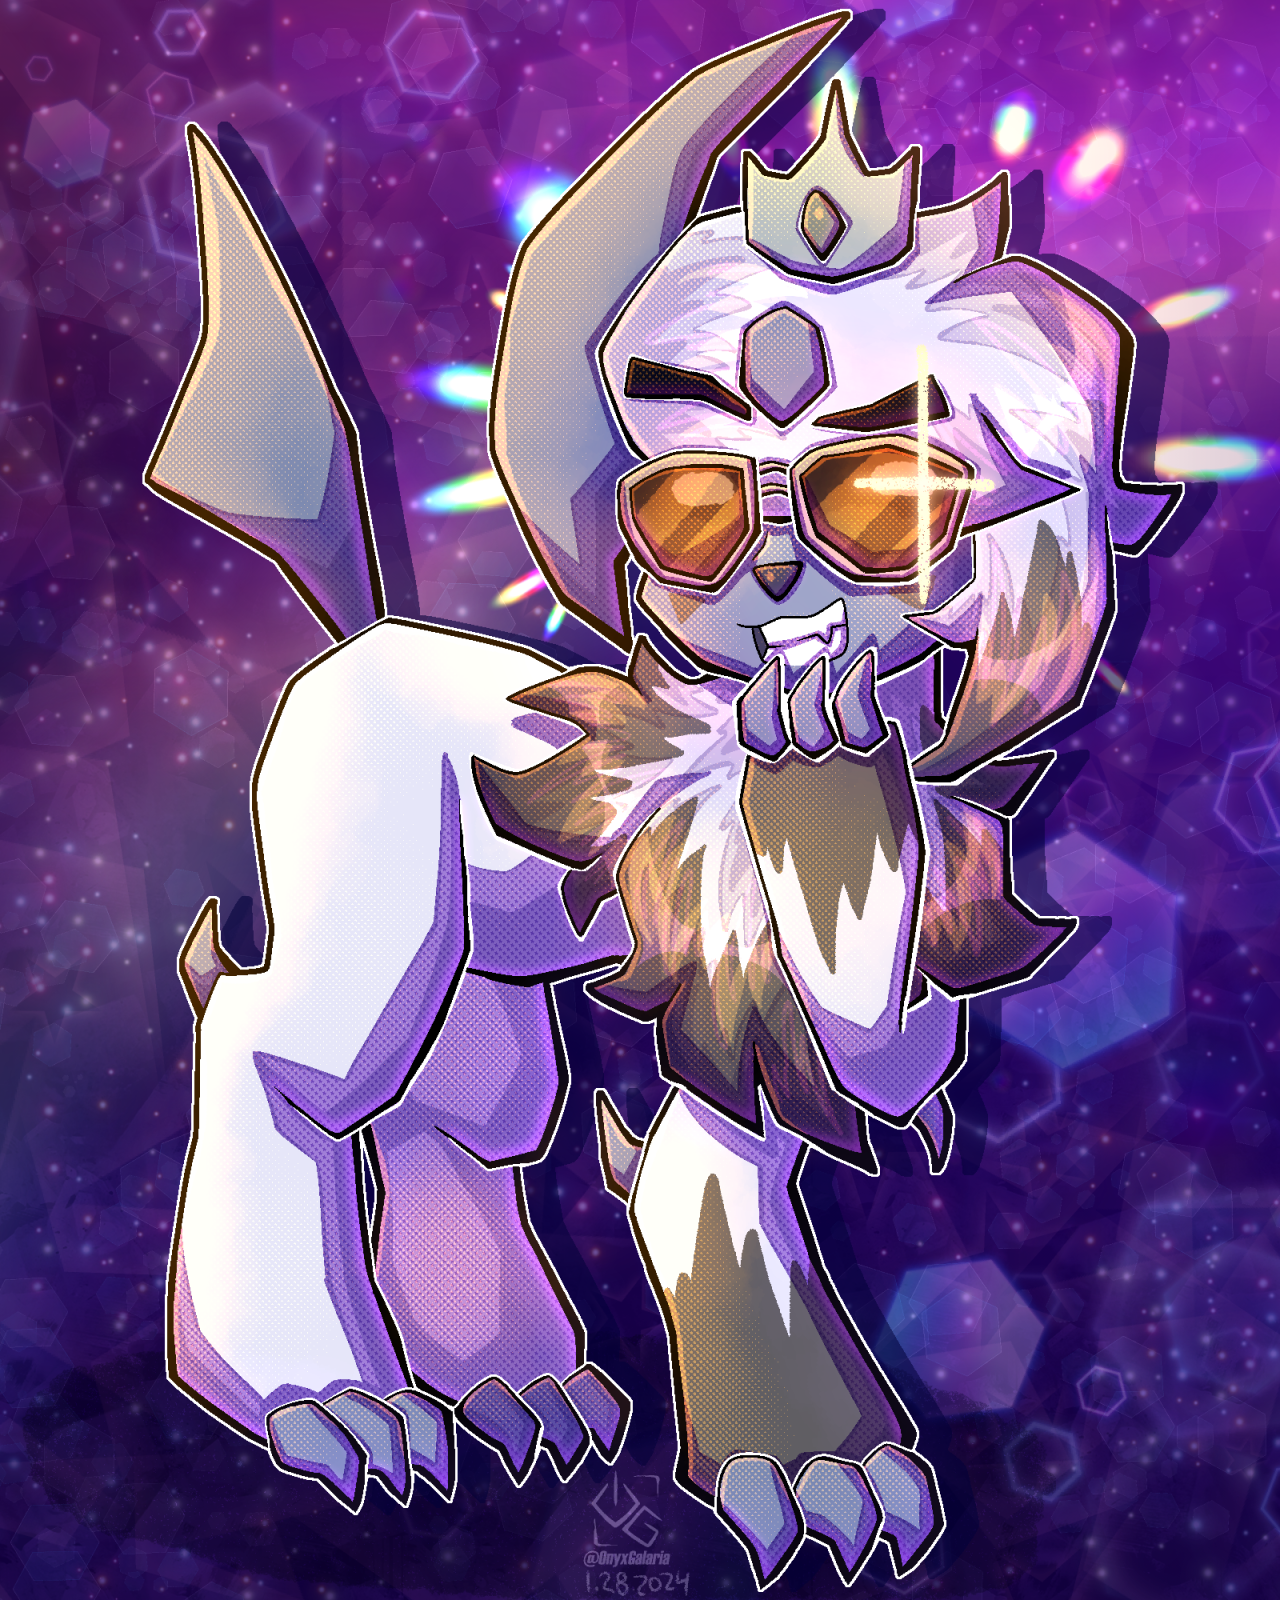 secretluvdisc:
“Secret Luvdisc Gift for ask-the-royal-absol!Loved drawing the smug bastard, lol. :P
To: @ask-the-royal-absol
From: @onyxgalaria-art
[OG]
”